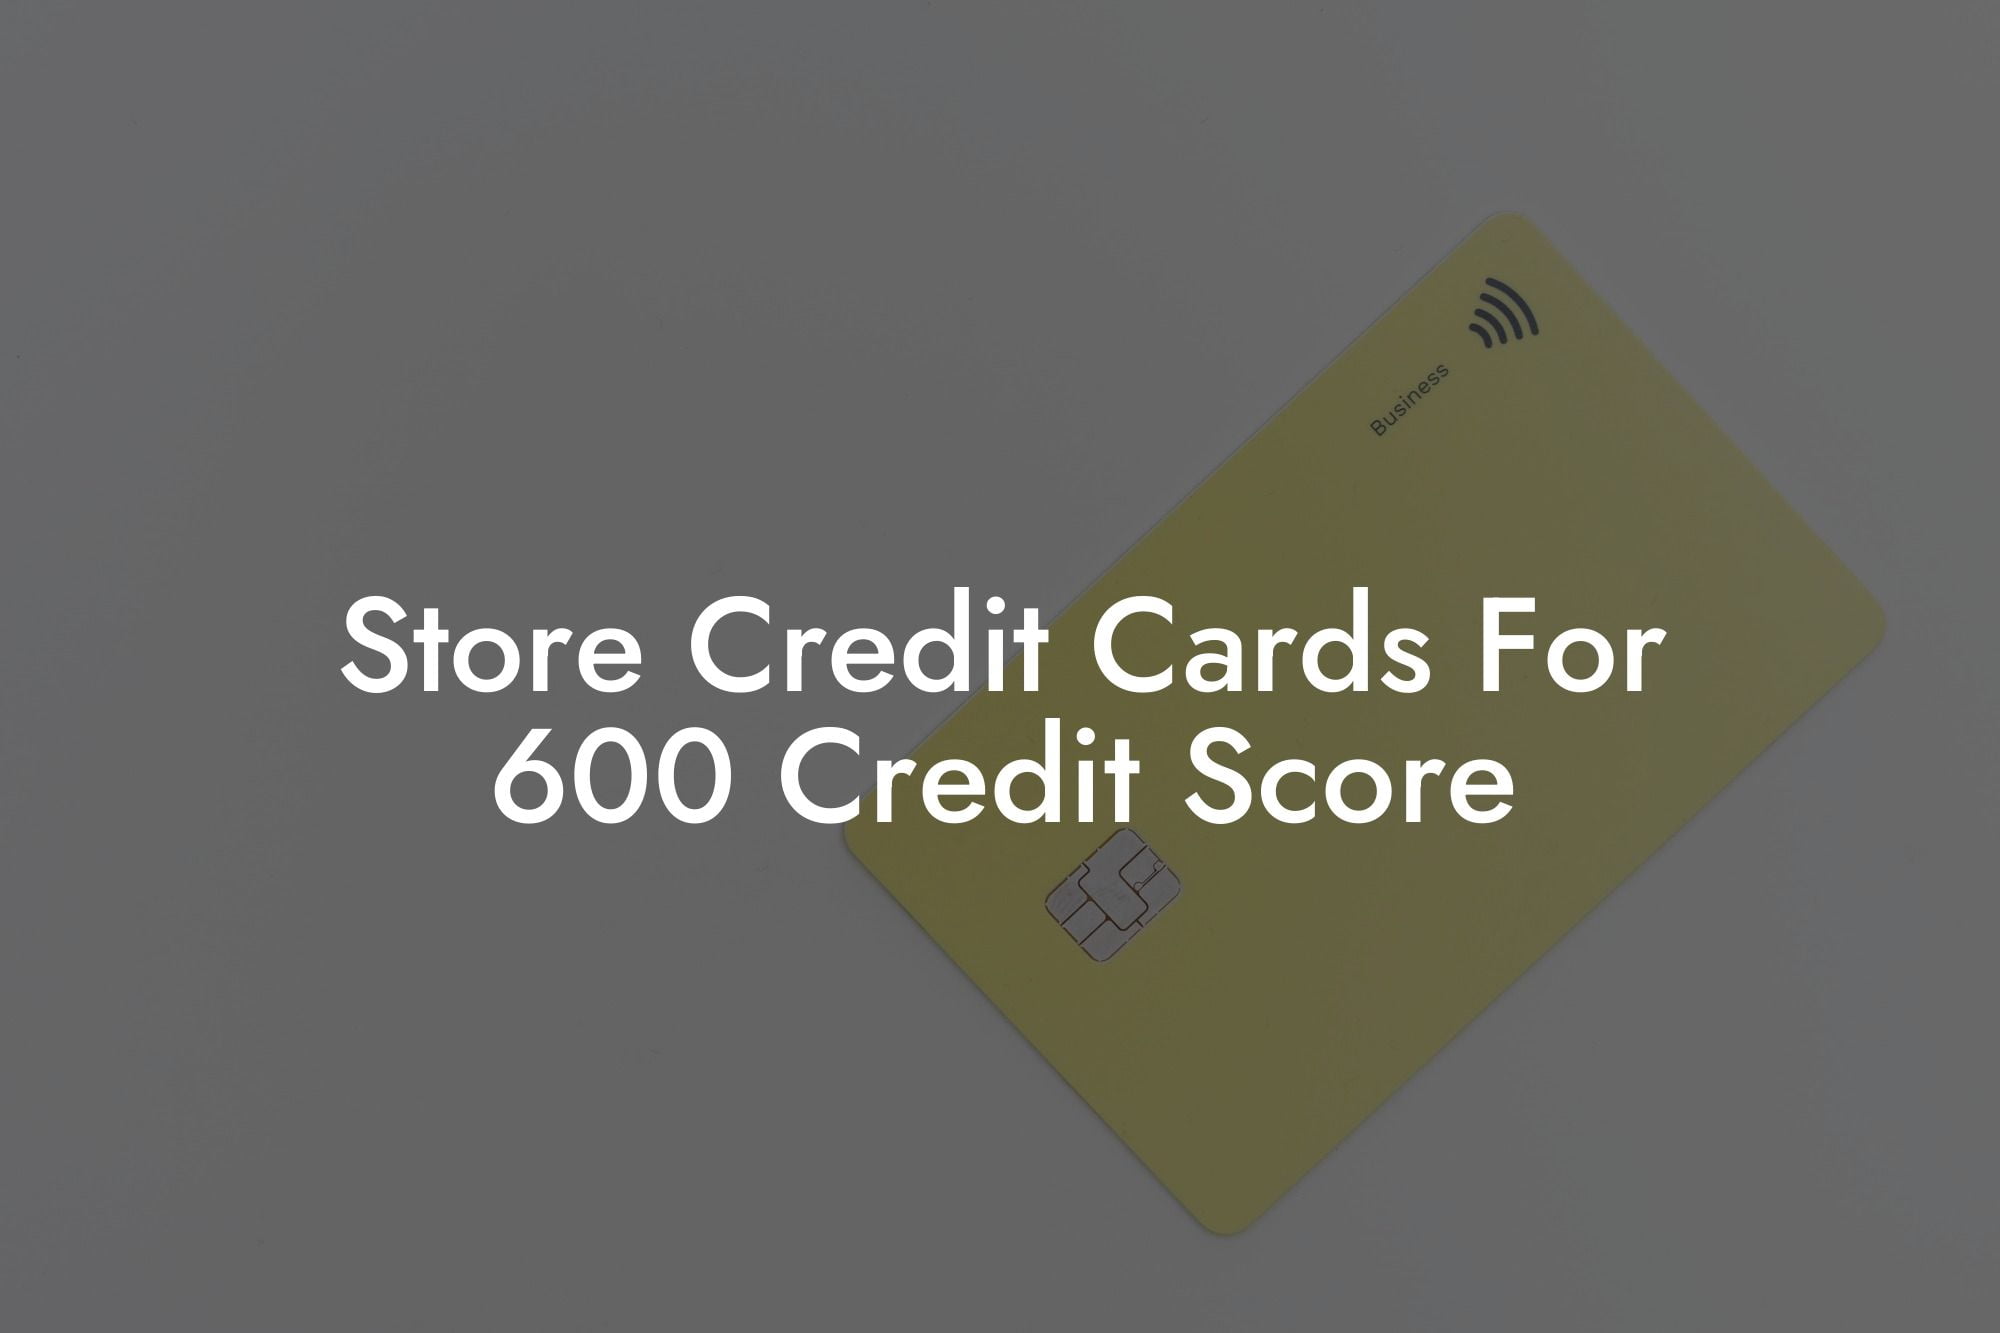 Store Credit Cards For 600 Credit Score